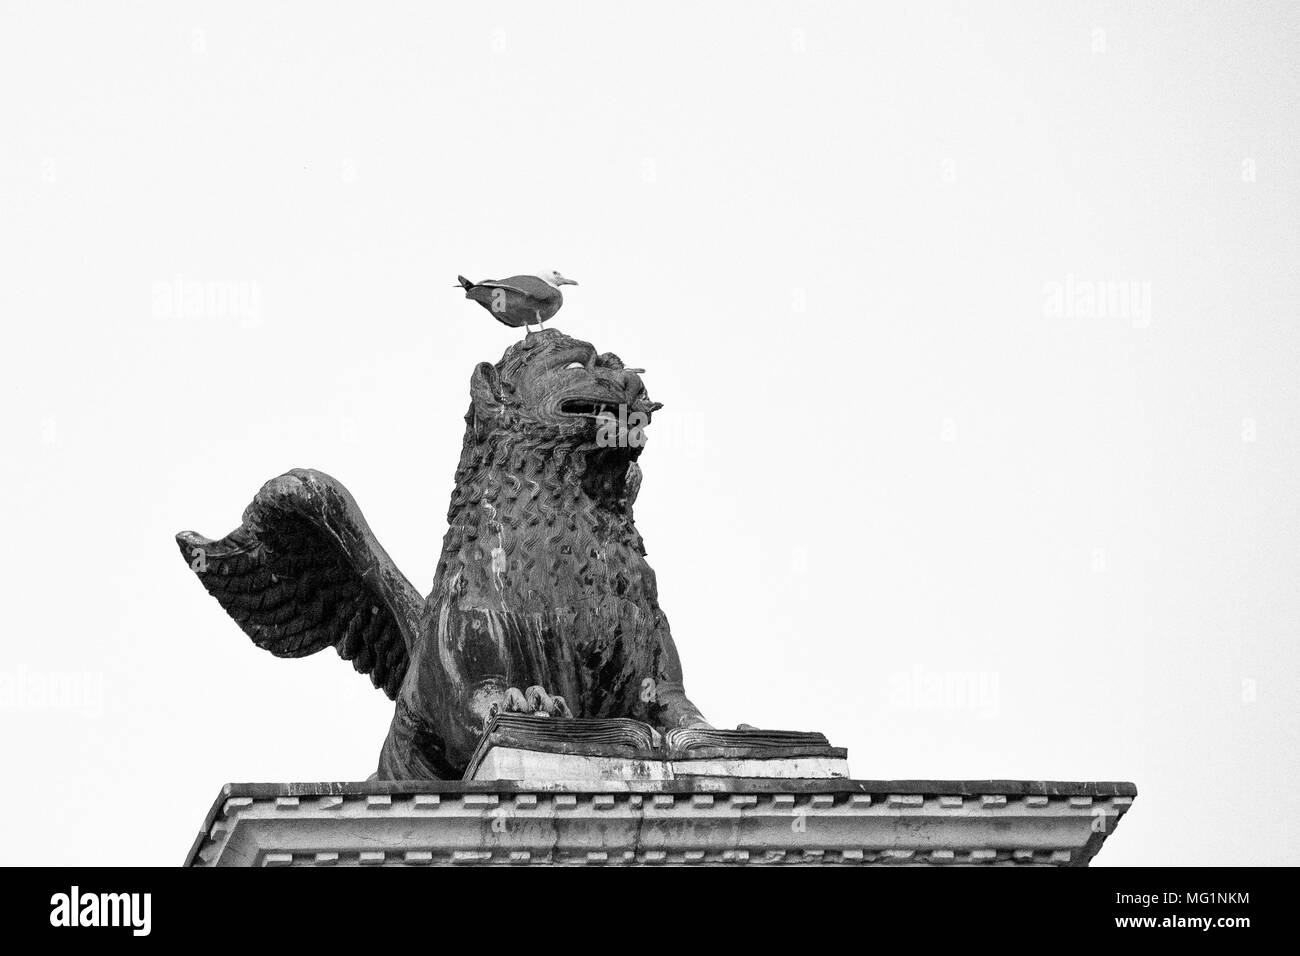 Old statue in Venice, Italy, Piazza San Marco. The statue represents Saint Mark, depicted as a winged lion Stock Photo